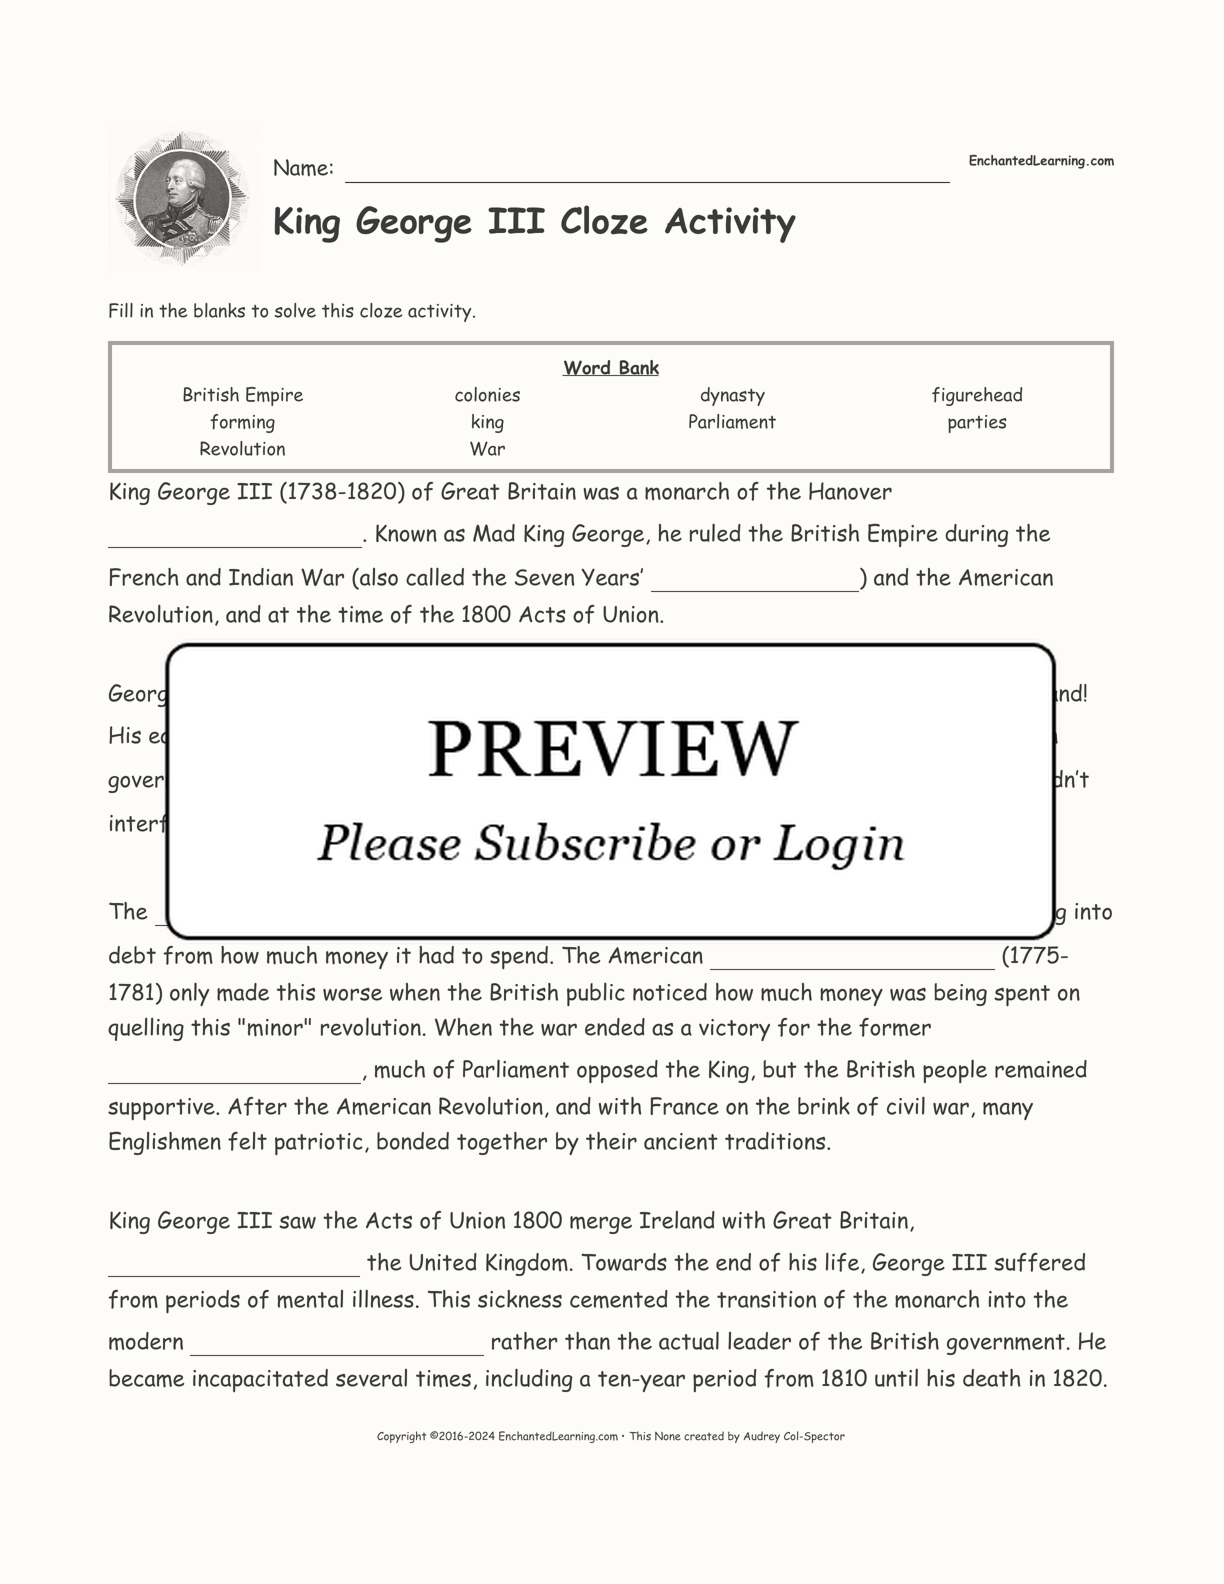 King George III Cloze Activity interactive worksheet page 1